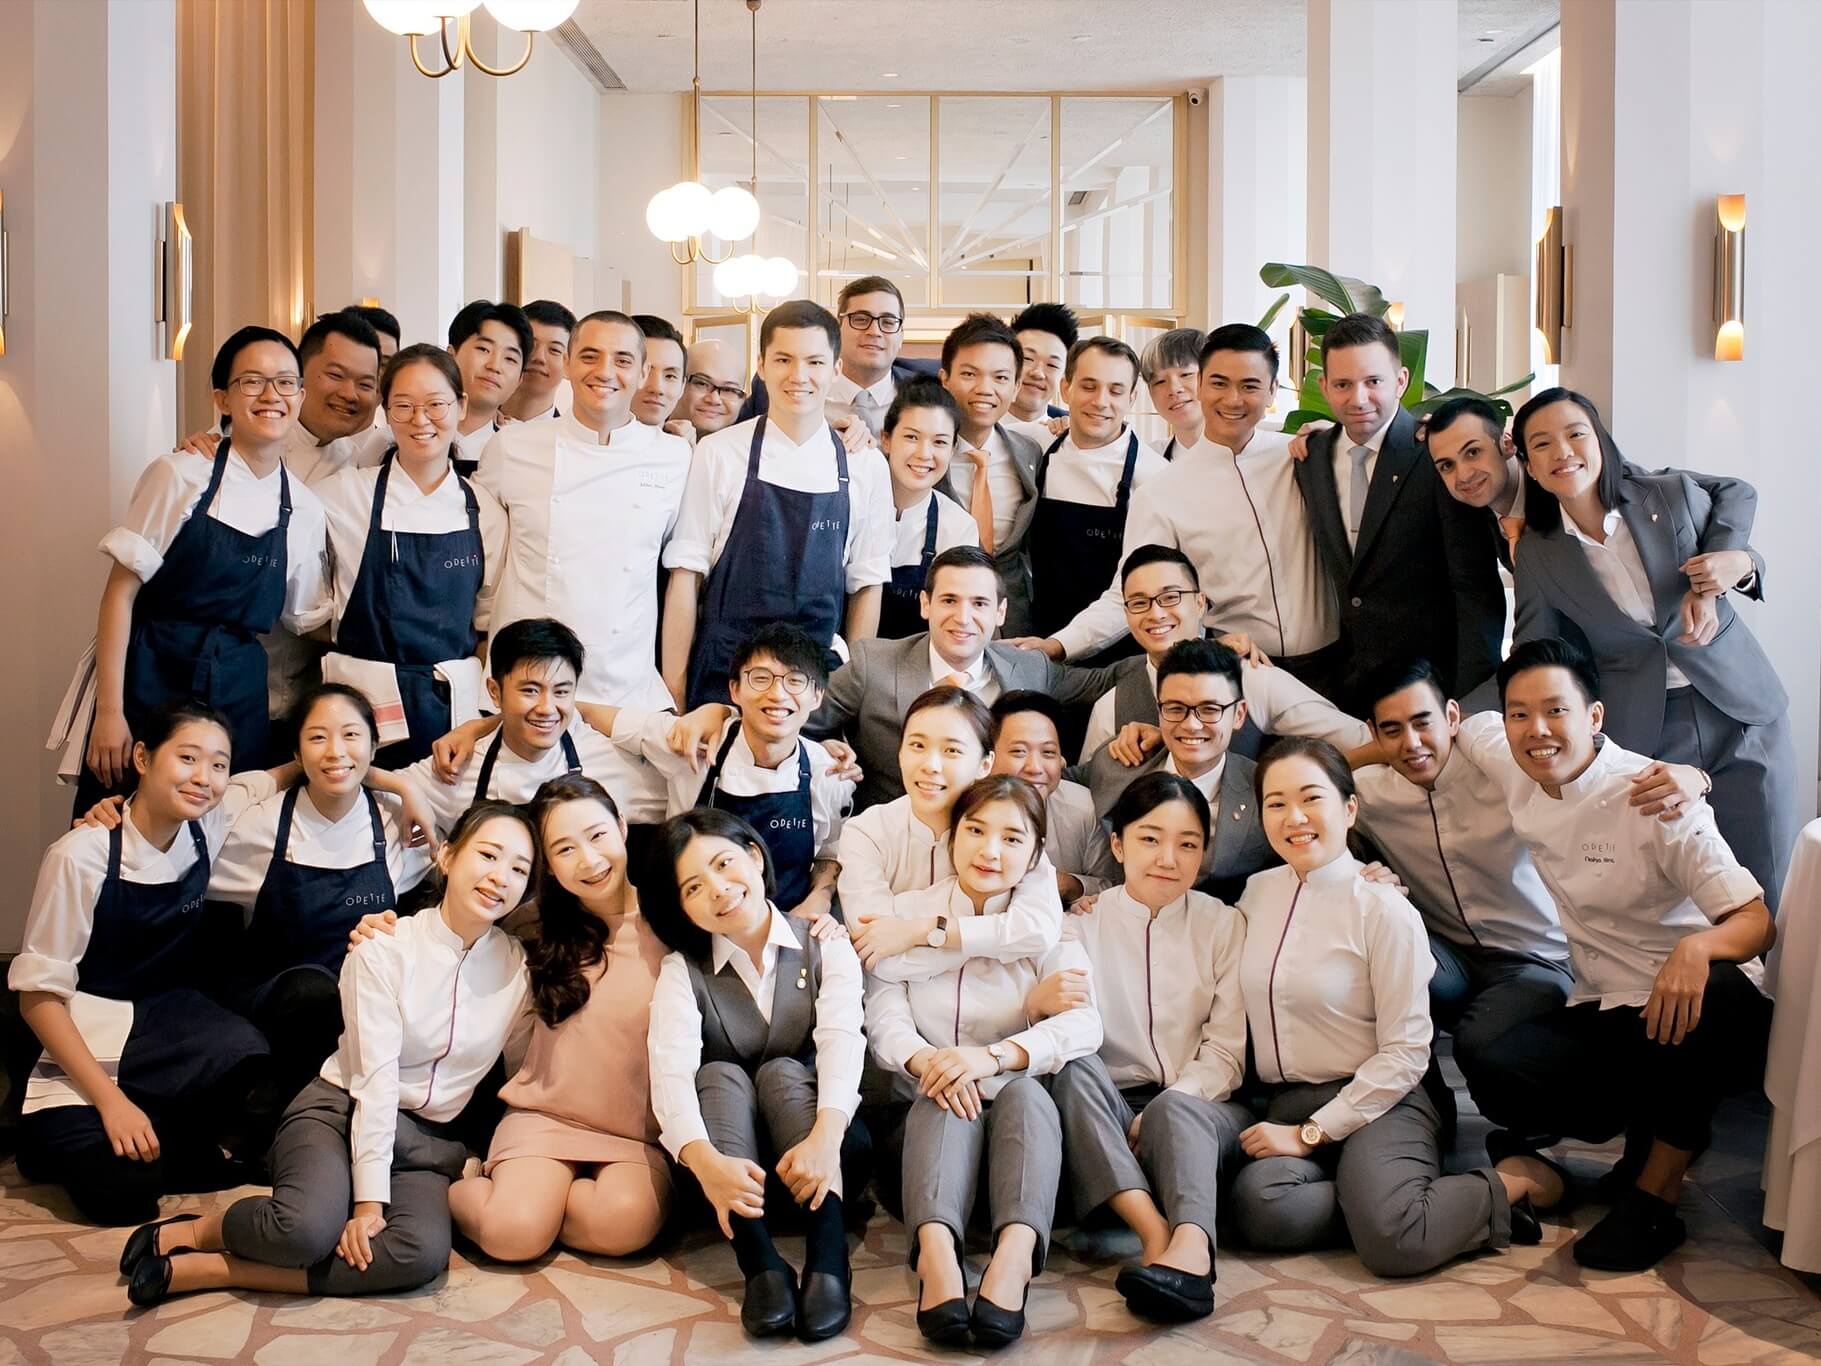 The World’s 50 Best Restaurants 2022: Singapore’s Odette slips to 36th place